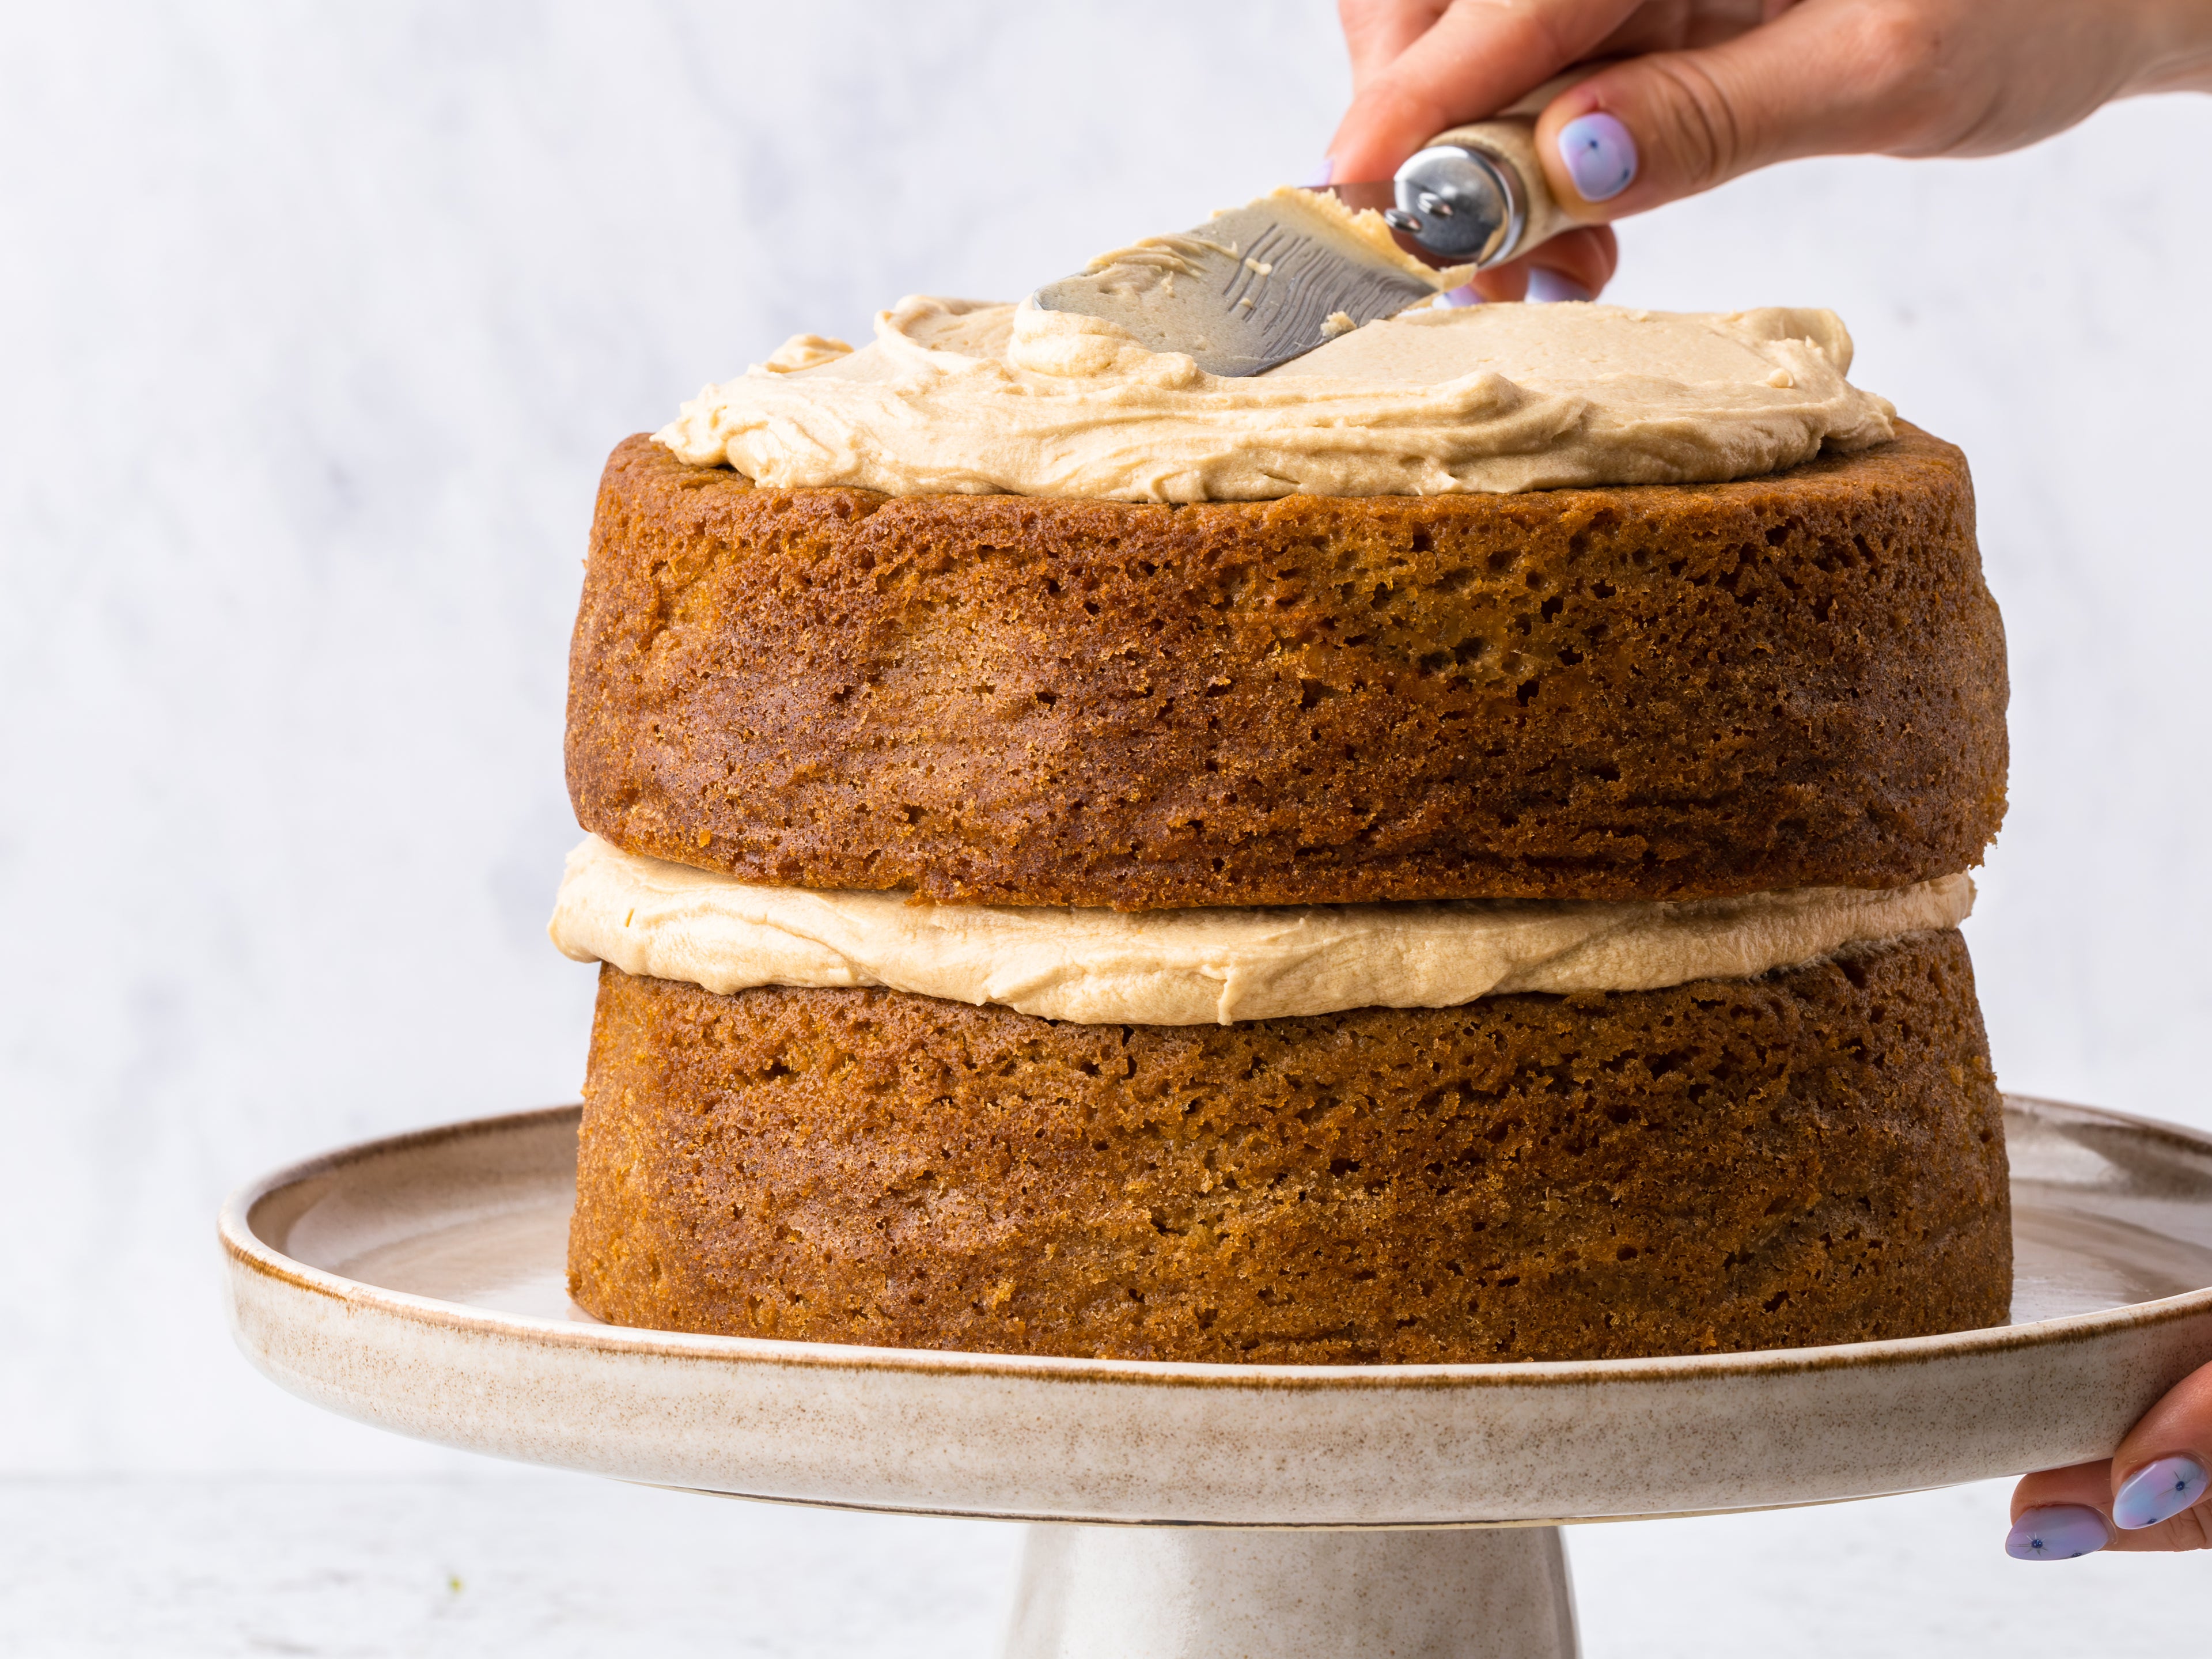 Coffee cake sponge on a cake stand with coffee buttercream being spread on top of it